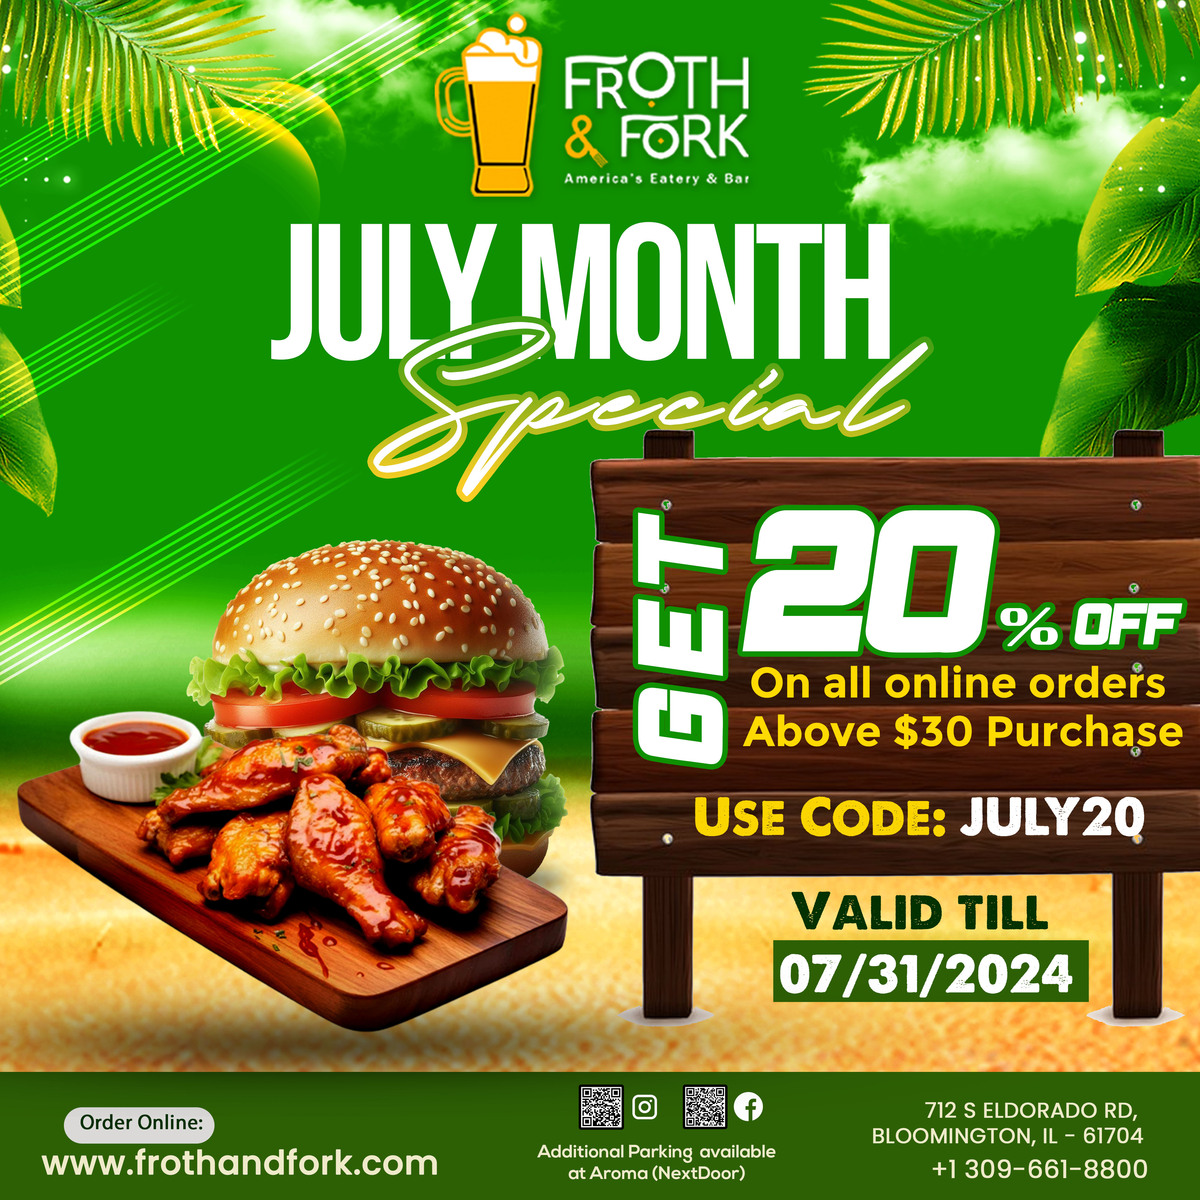 July Month Special